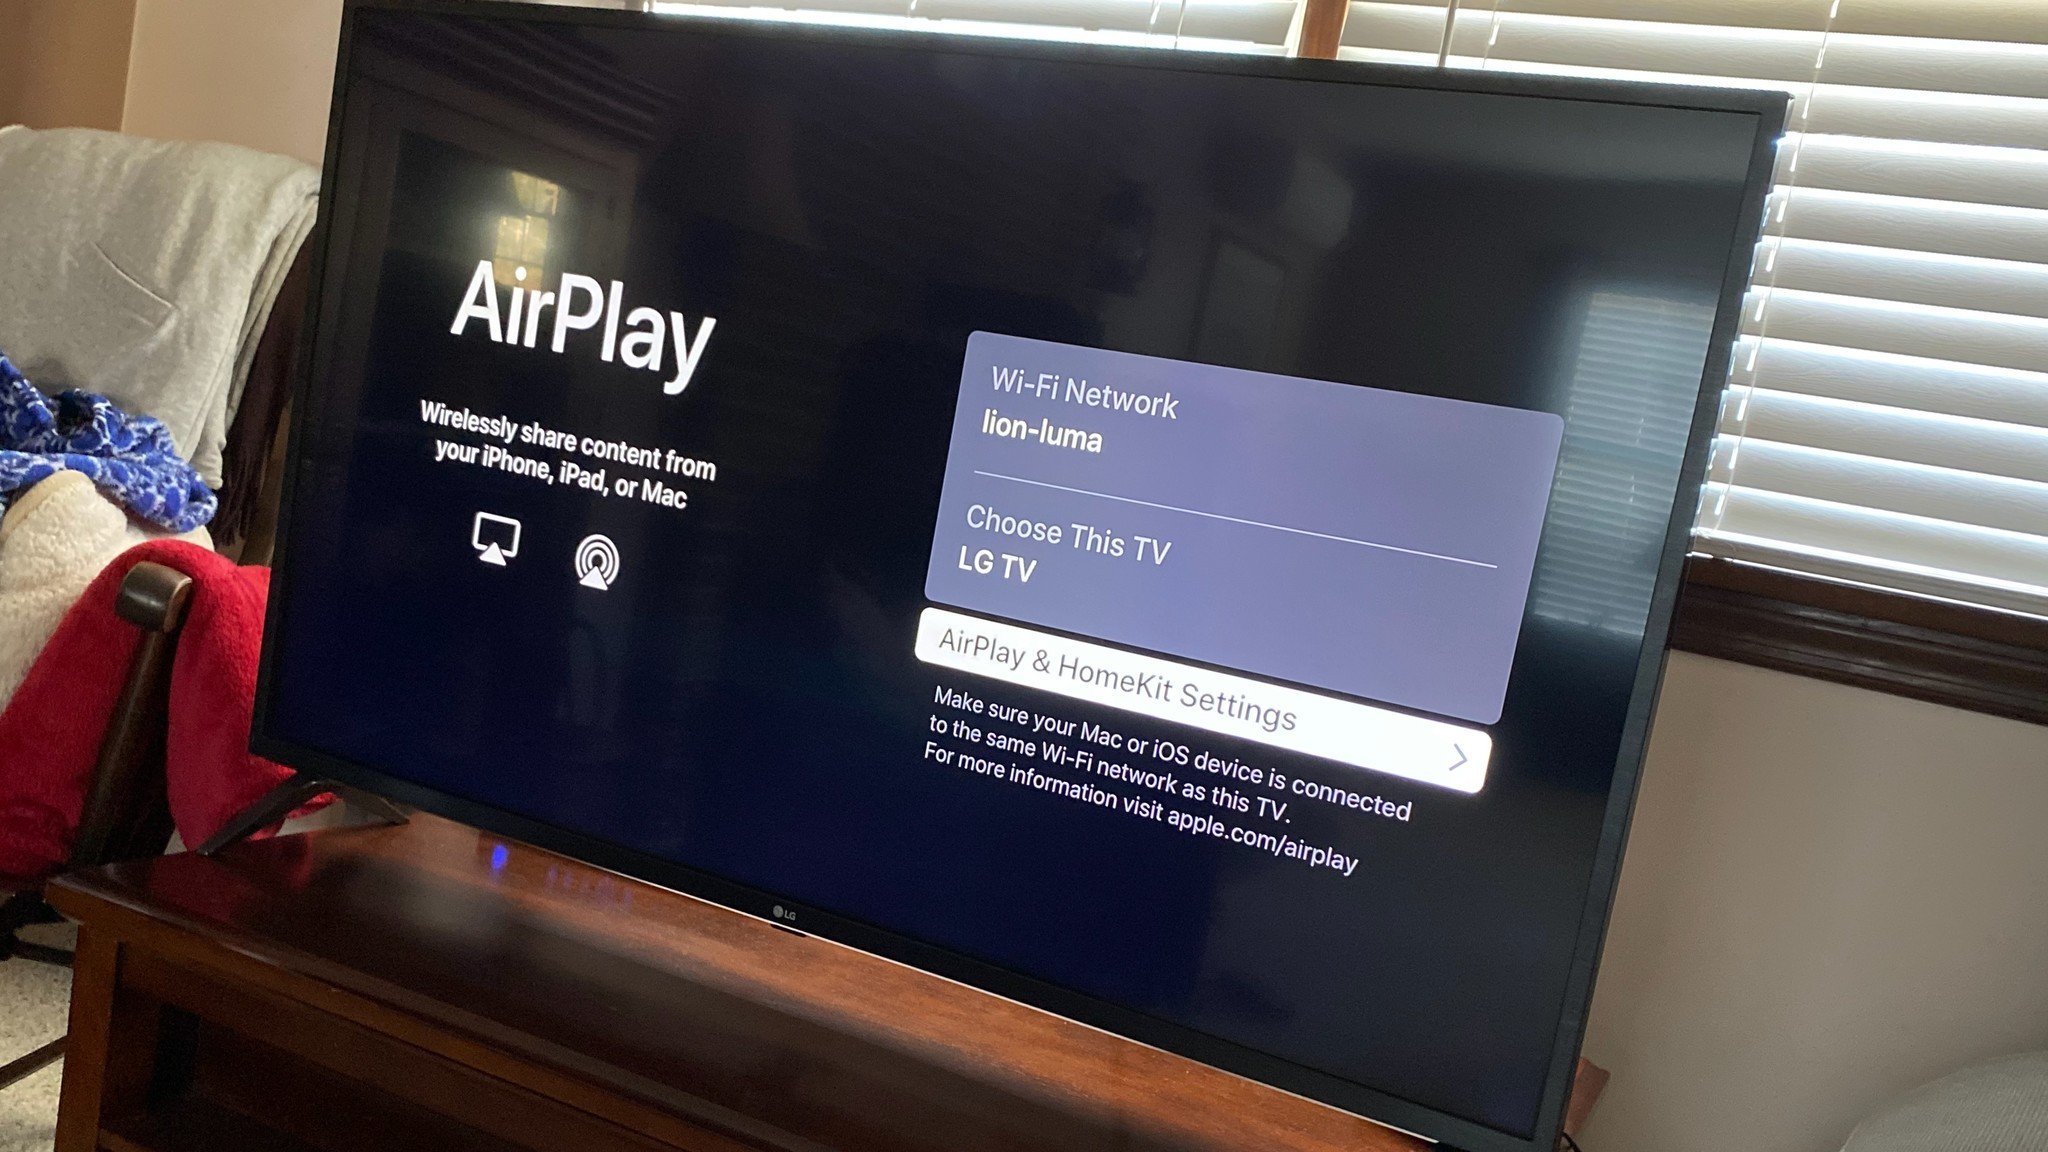 Hot Support For Pre 2019 Tvs, How Do I Mirror My Ipad To Lg Smart Tv Wirelessly